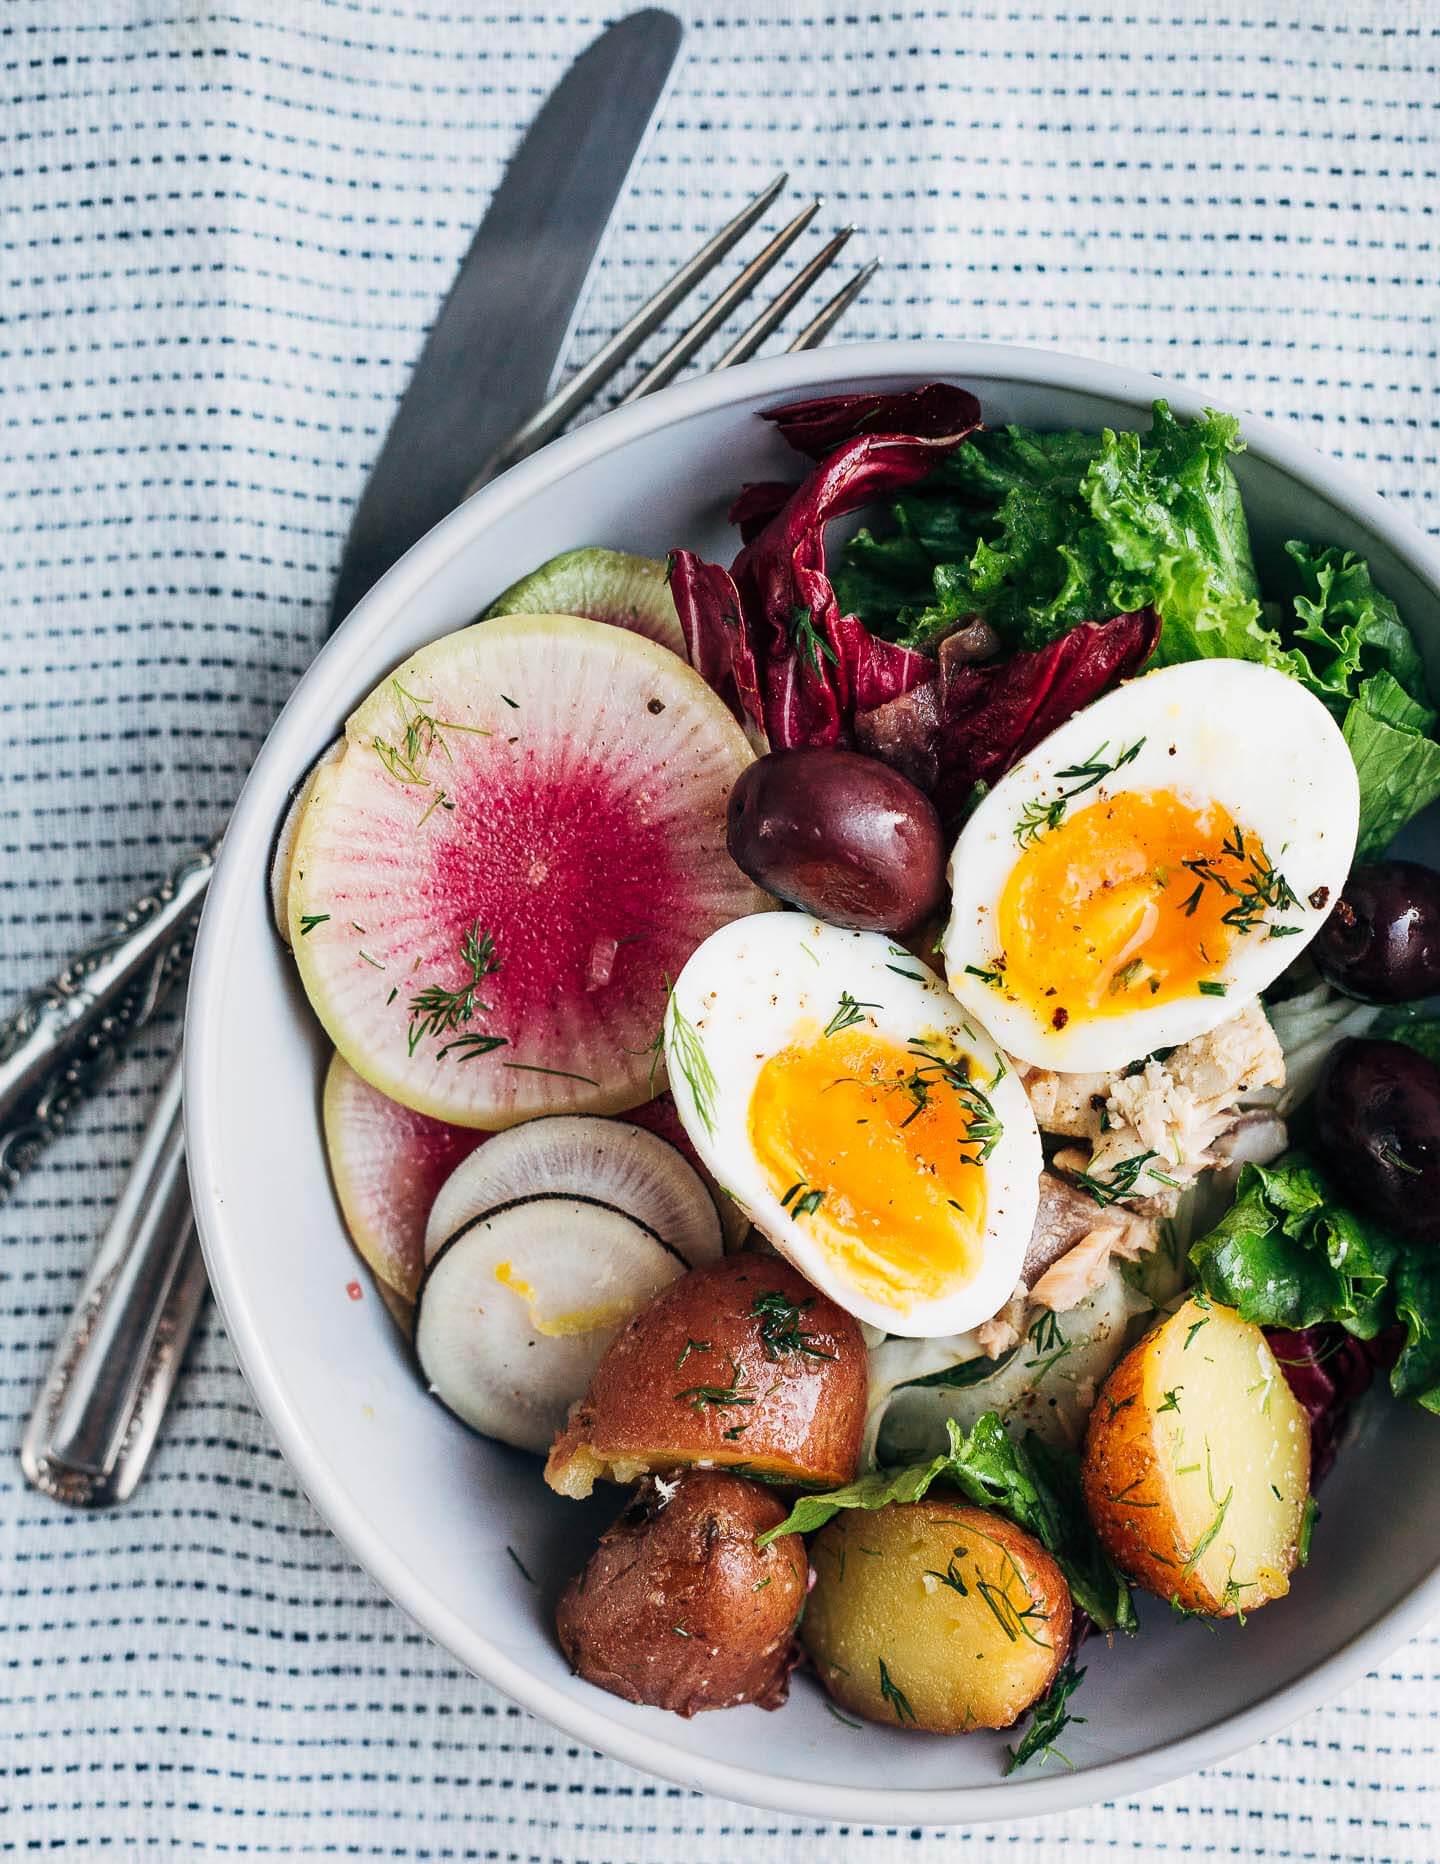 This winter Nicoise-ish salad hits all the right notes with crunchy shaved fennel and radishes, greens and radicchio, tender new potatoes suffused with herbs and a punchy vinaigrette, just-set 7-minute steamed eggs, and piles of olives.